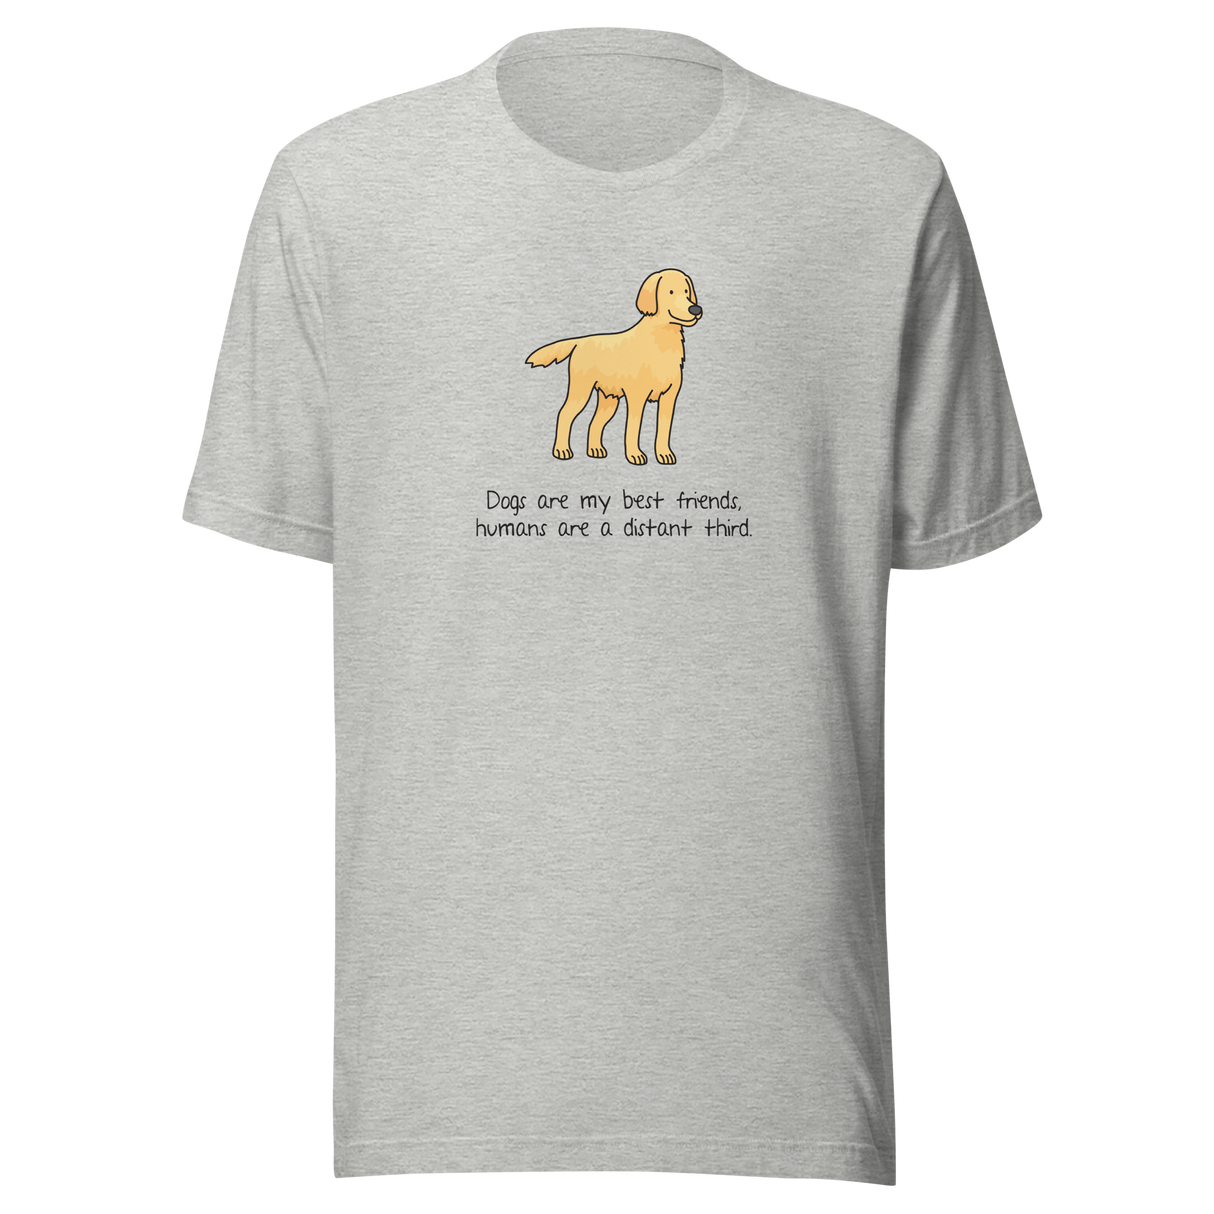 dogs-are-my-best-friends-humans-are-a-distant-third-dog-tee-mans-best-friend-t-shirt-puppy-tee-dog-lover-t-shirt-dog-mom-tee#color_athletic-heather